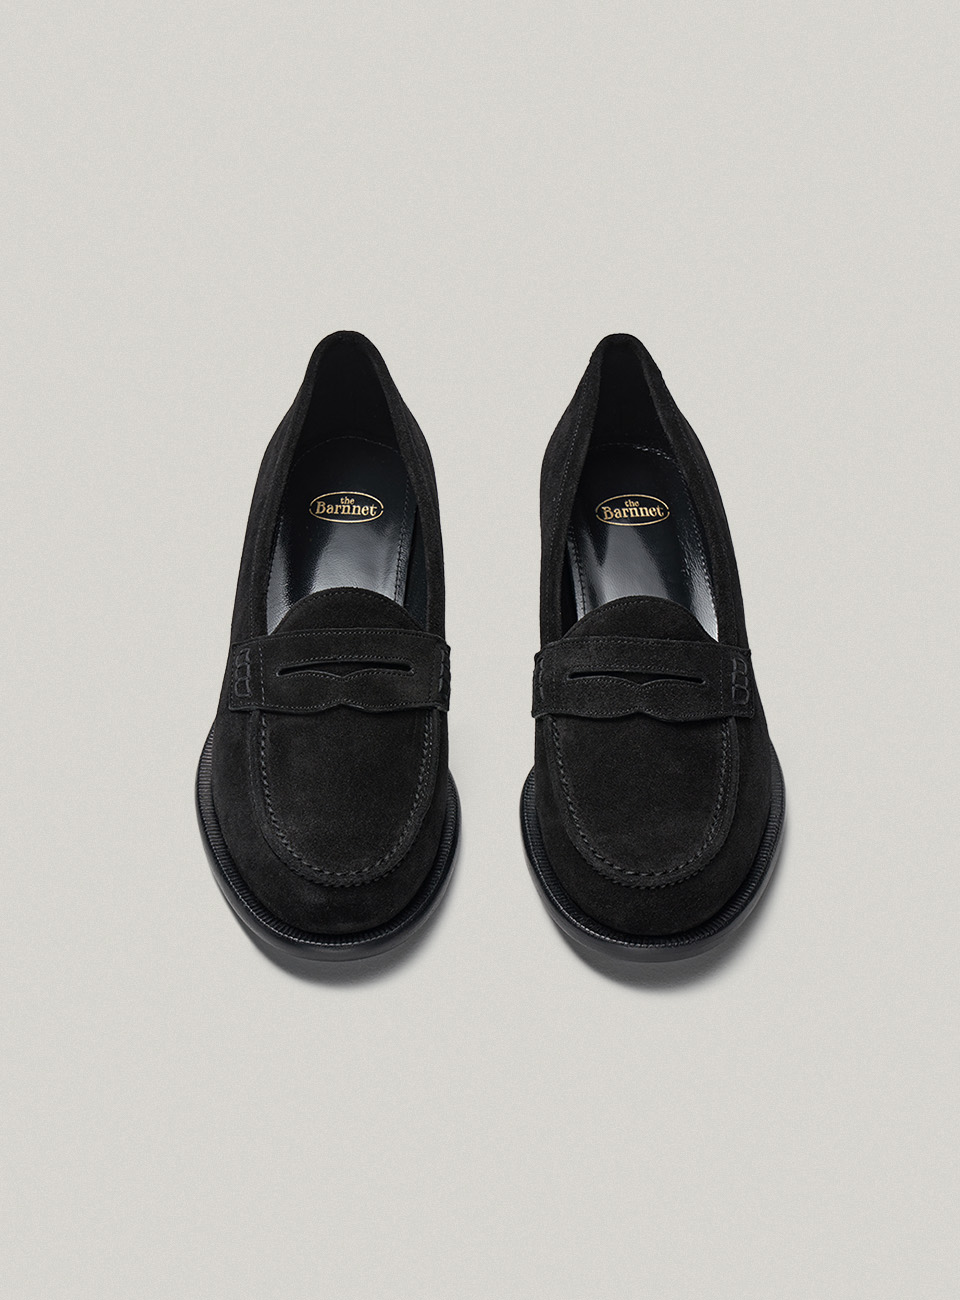 Black Suede Penny Loafers by GRUPPO MASTROTTO